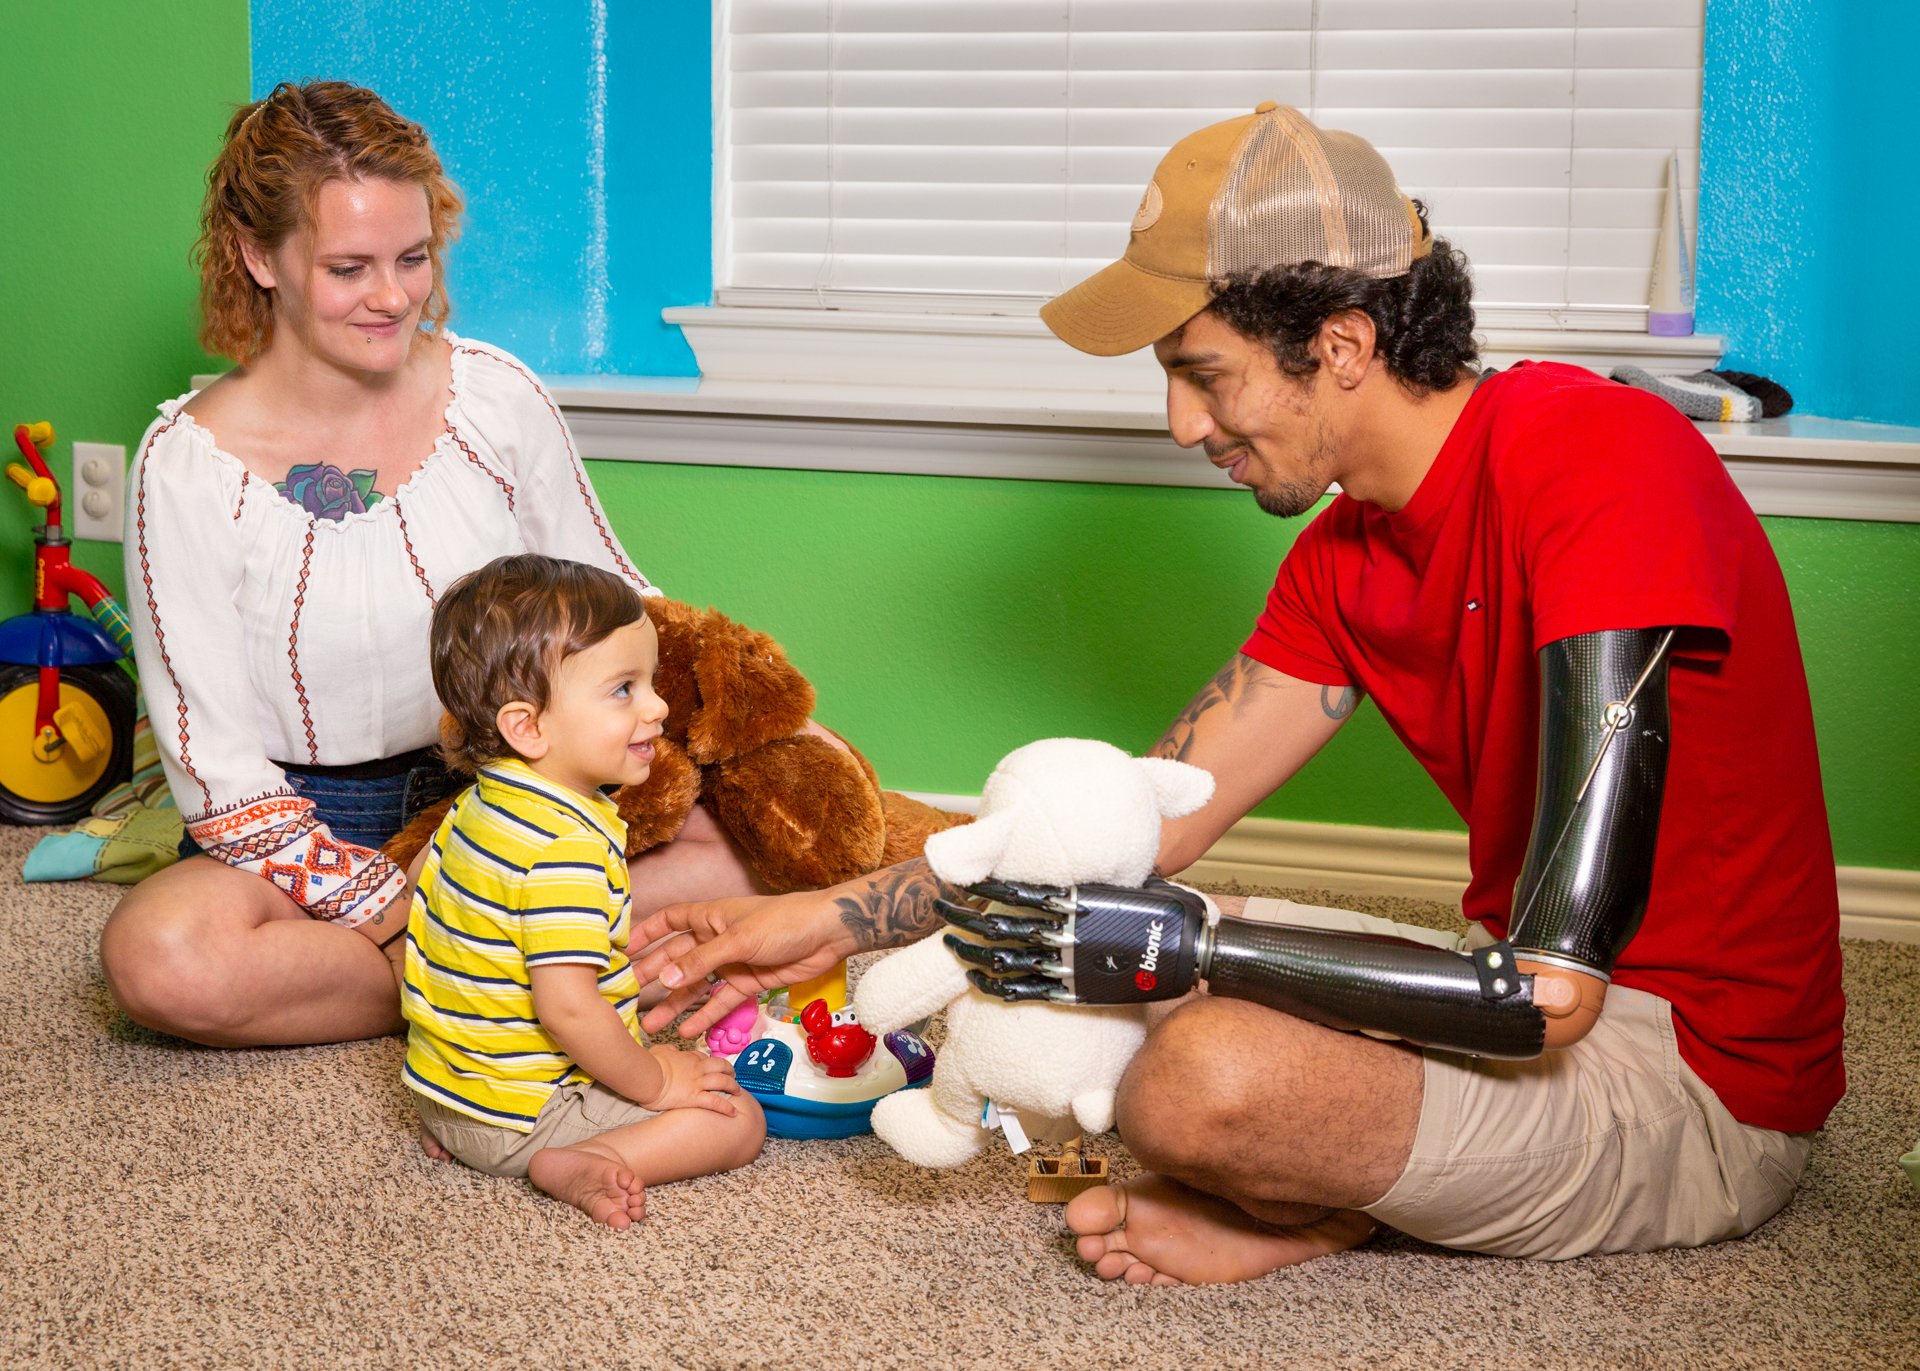 A high transhumeral patient uses a hybrid electrical and body-powered prosthesis to play with his family.